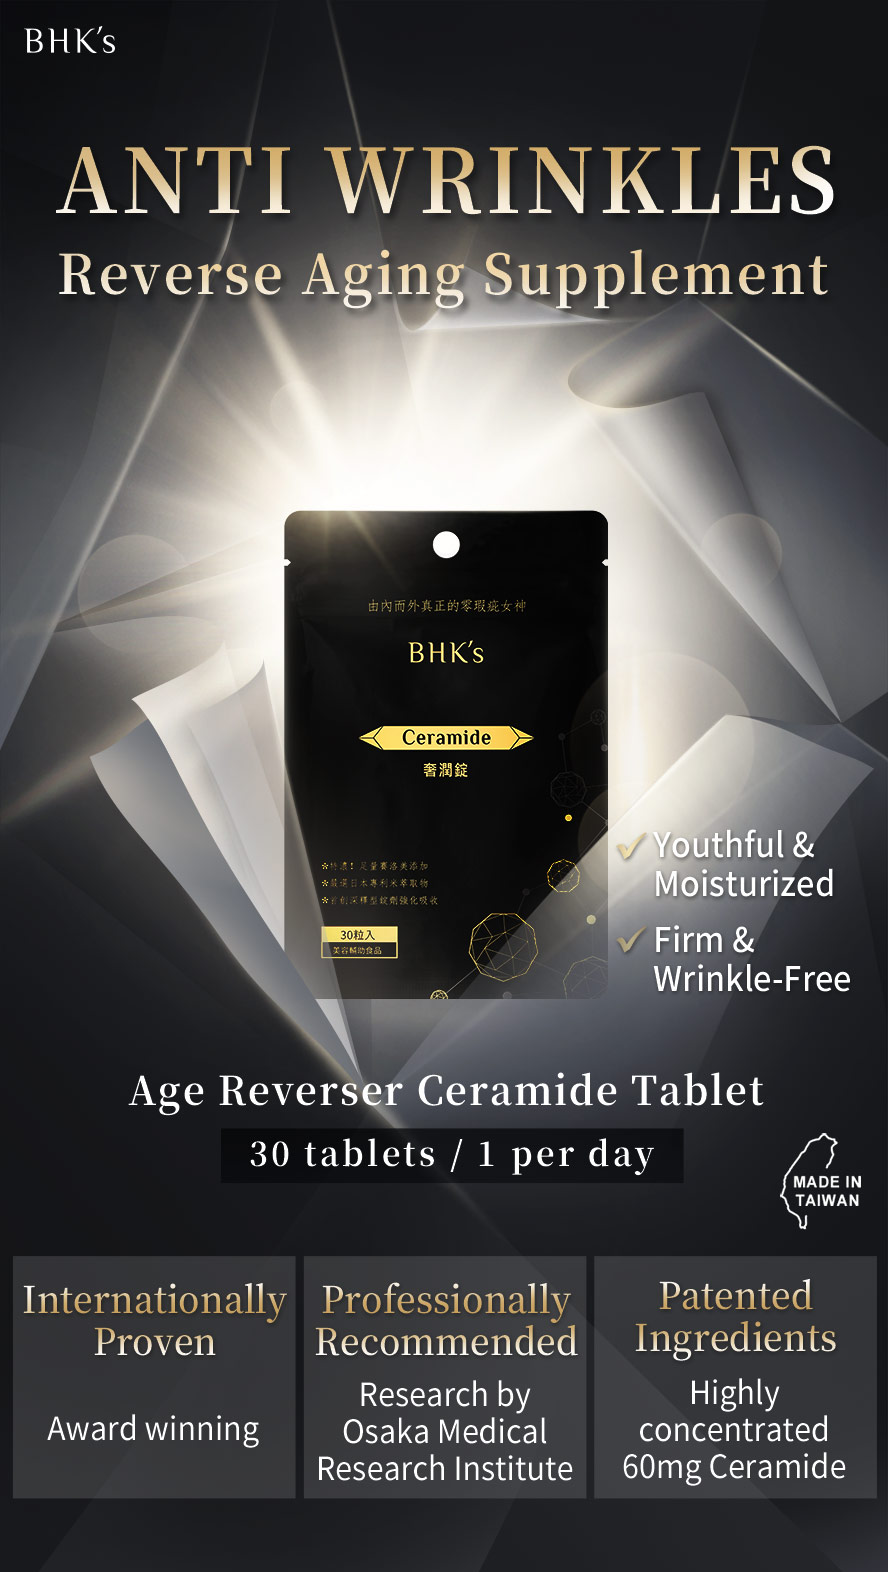 BHK's Ceramide giving you plumper, smoother, firmer-feeling skin with fewer visible lines and wrinkles